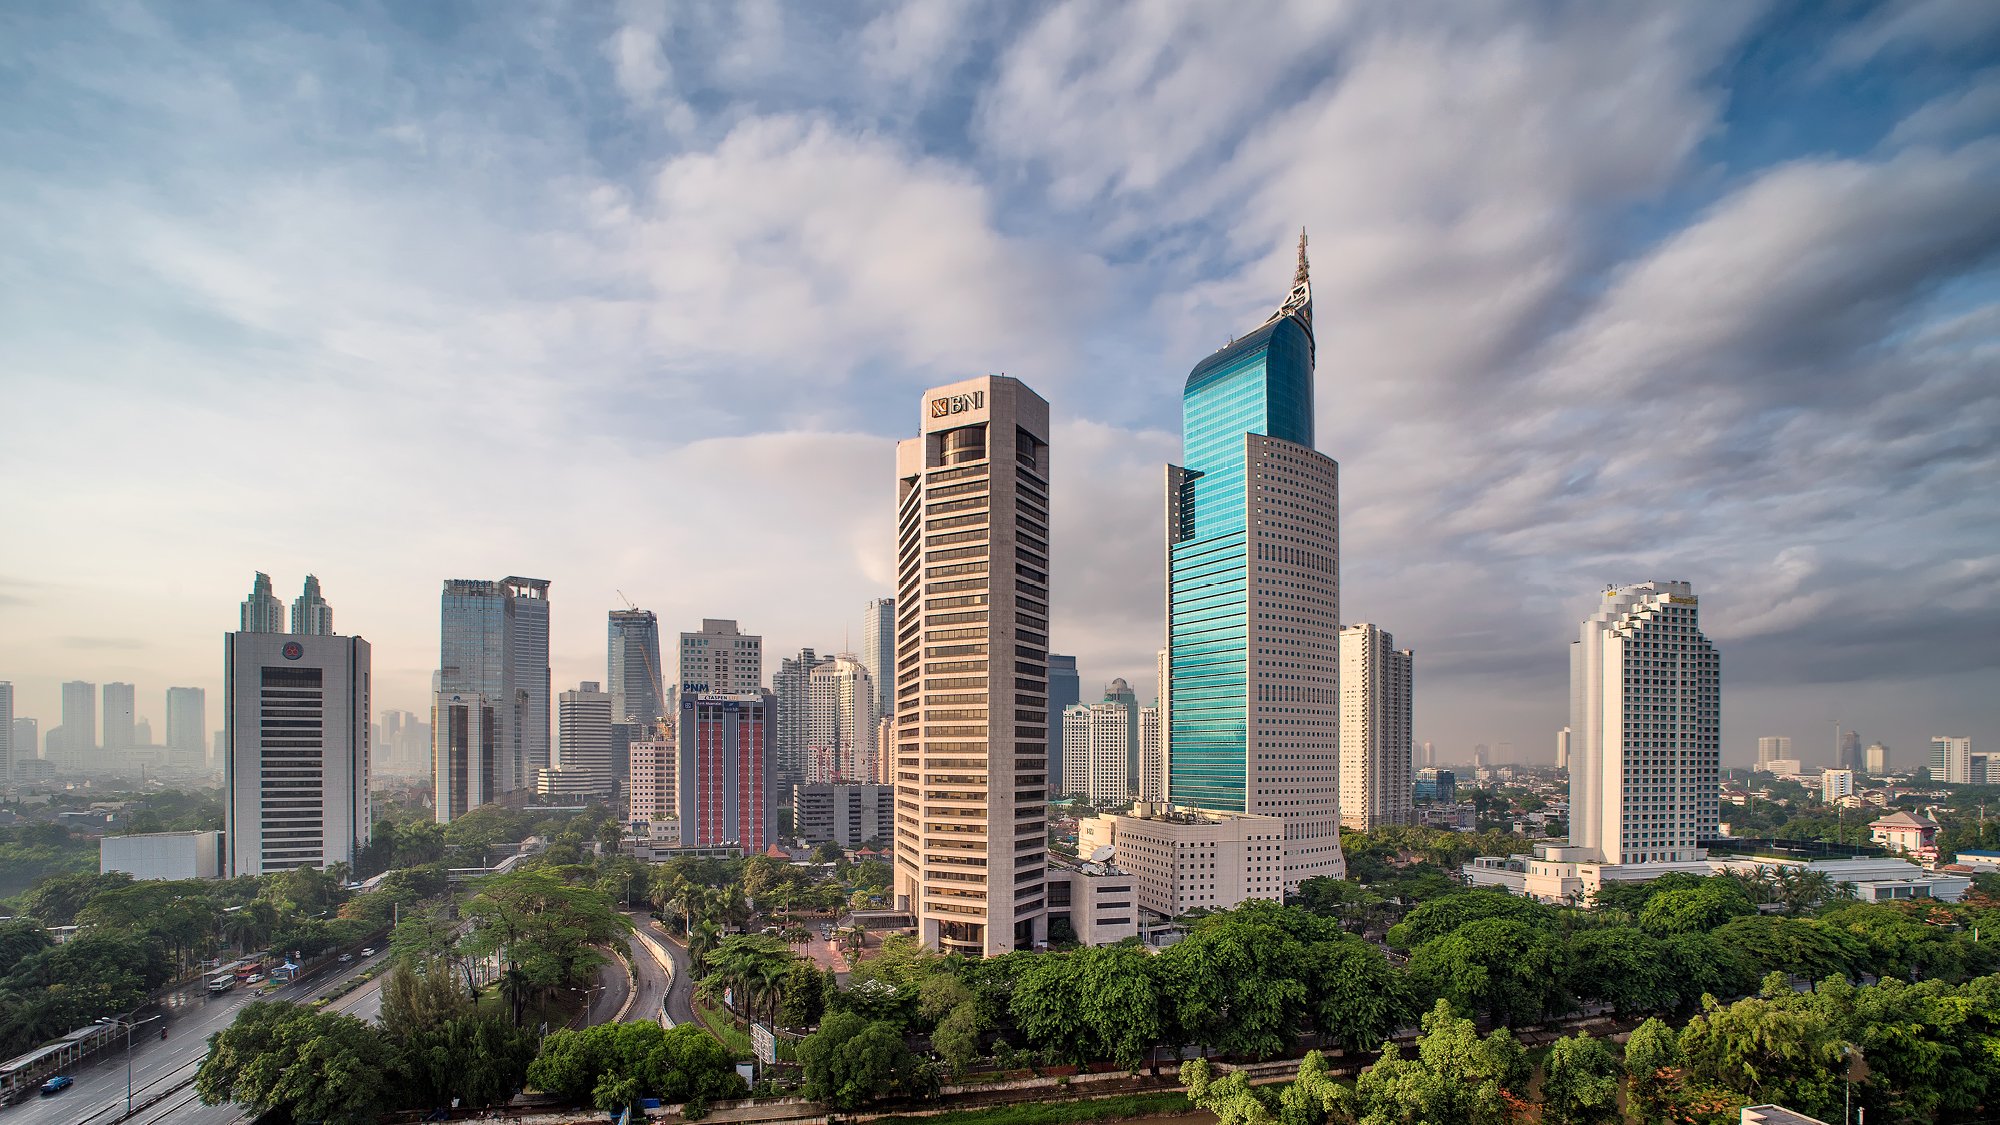 Skyline view of Jakarta city, Indonesia at day time